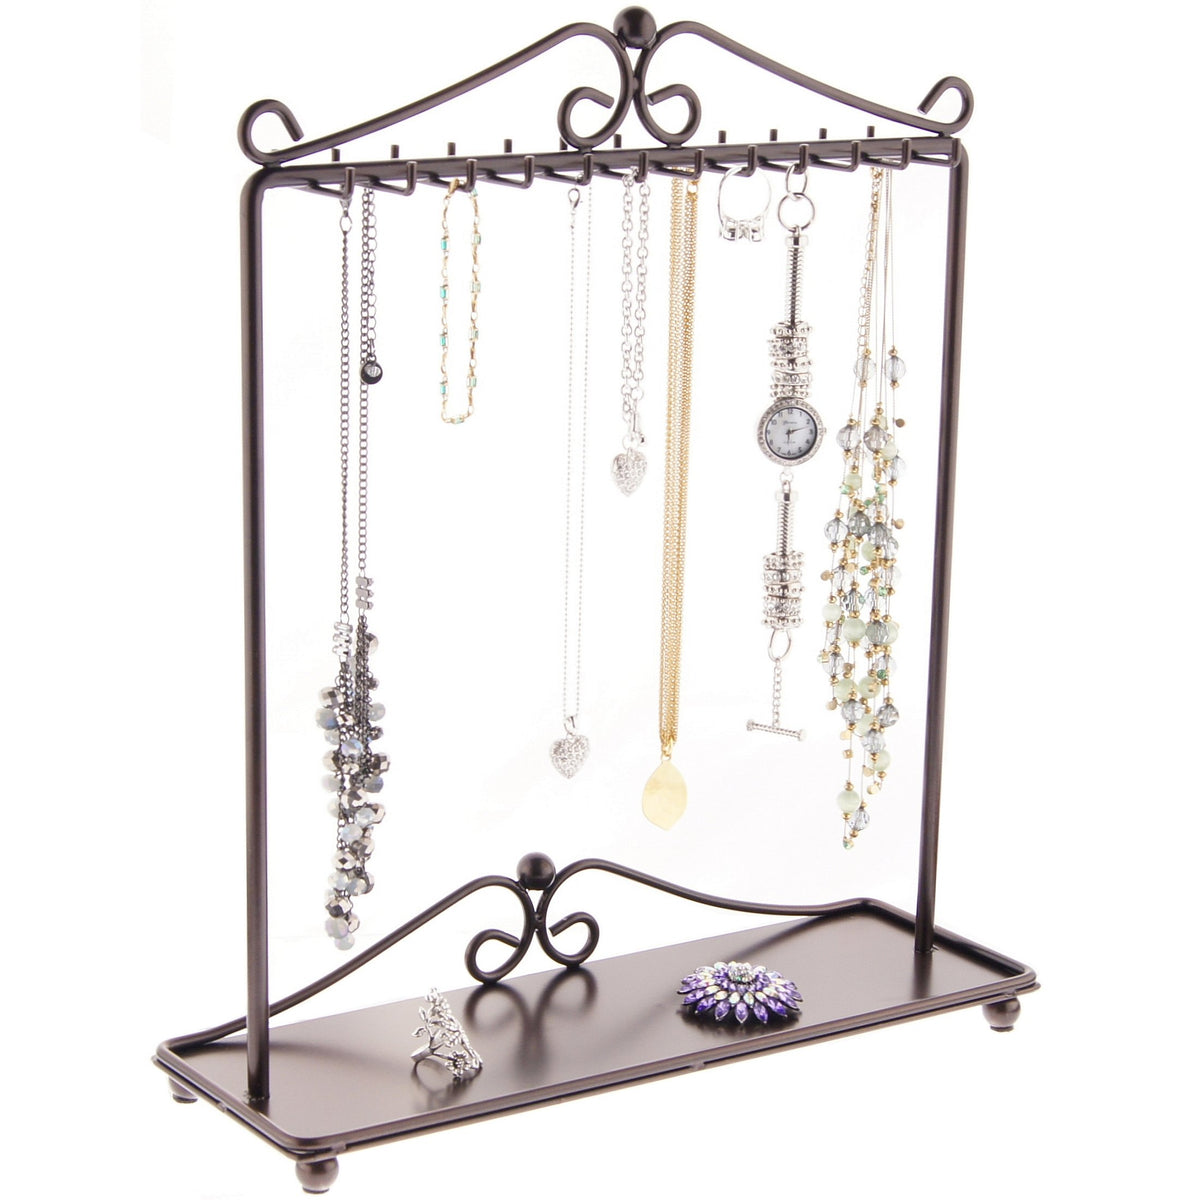  OPELETNNT Necklace Display Stands for Selling, 3 Tier Necklace  Holder Stand with Velvet, 72 Slots Necklace Organizer Stand, Rustic Wood  Necklace Stand Jewelry Display for Vendors Craft Shows : Clothing, Shoes